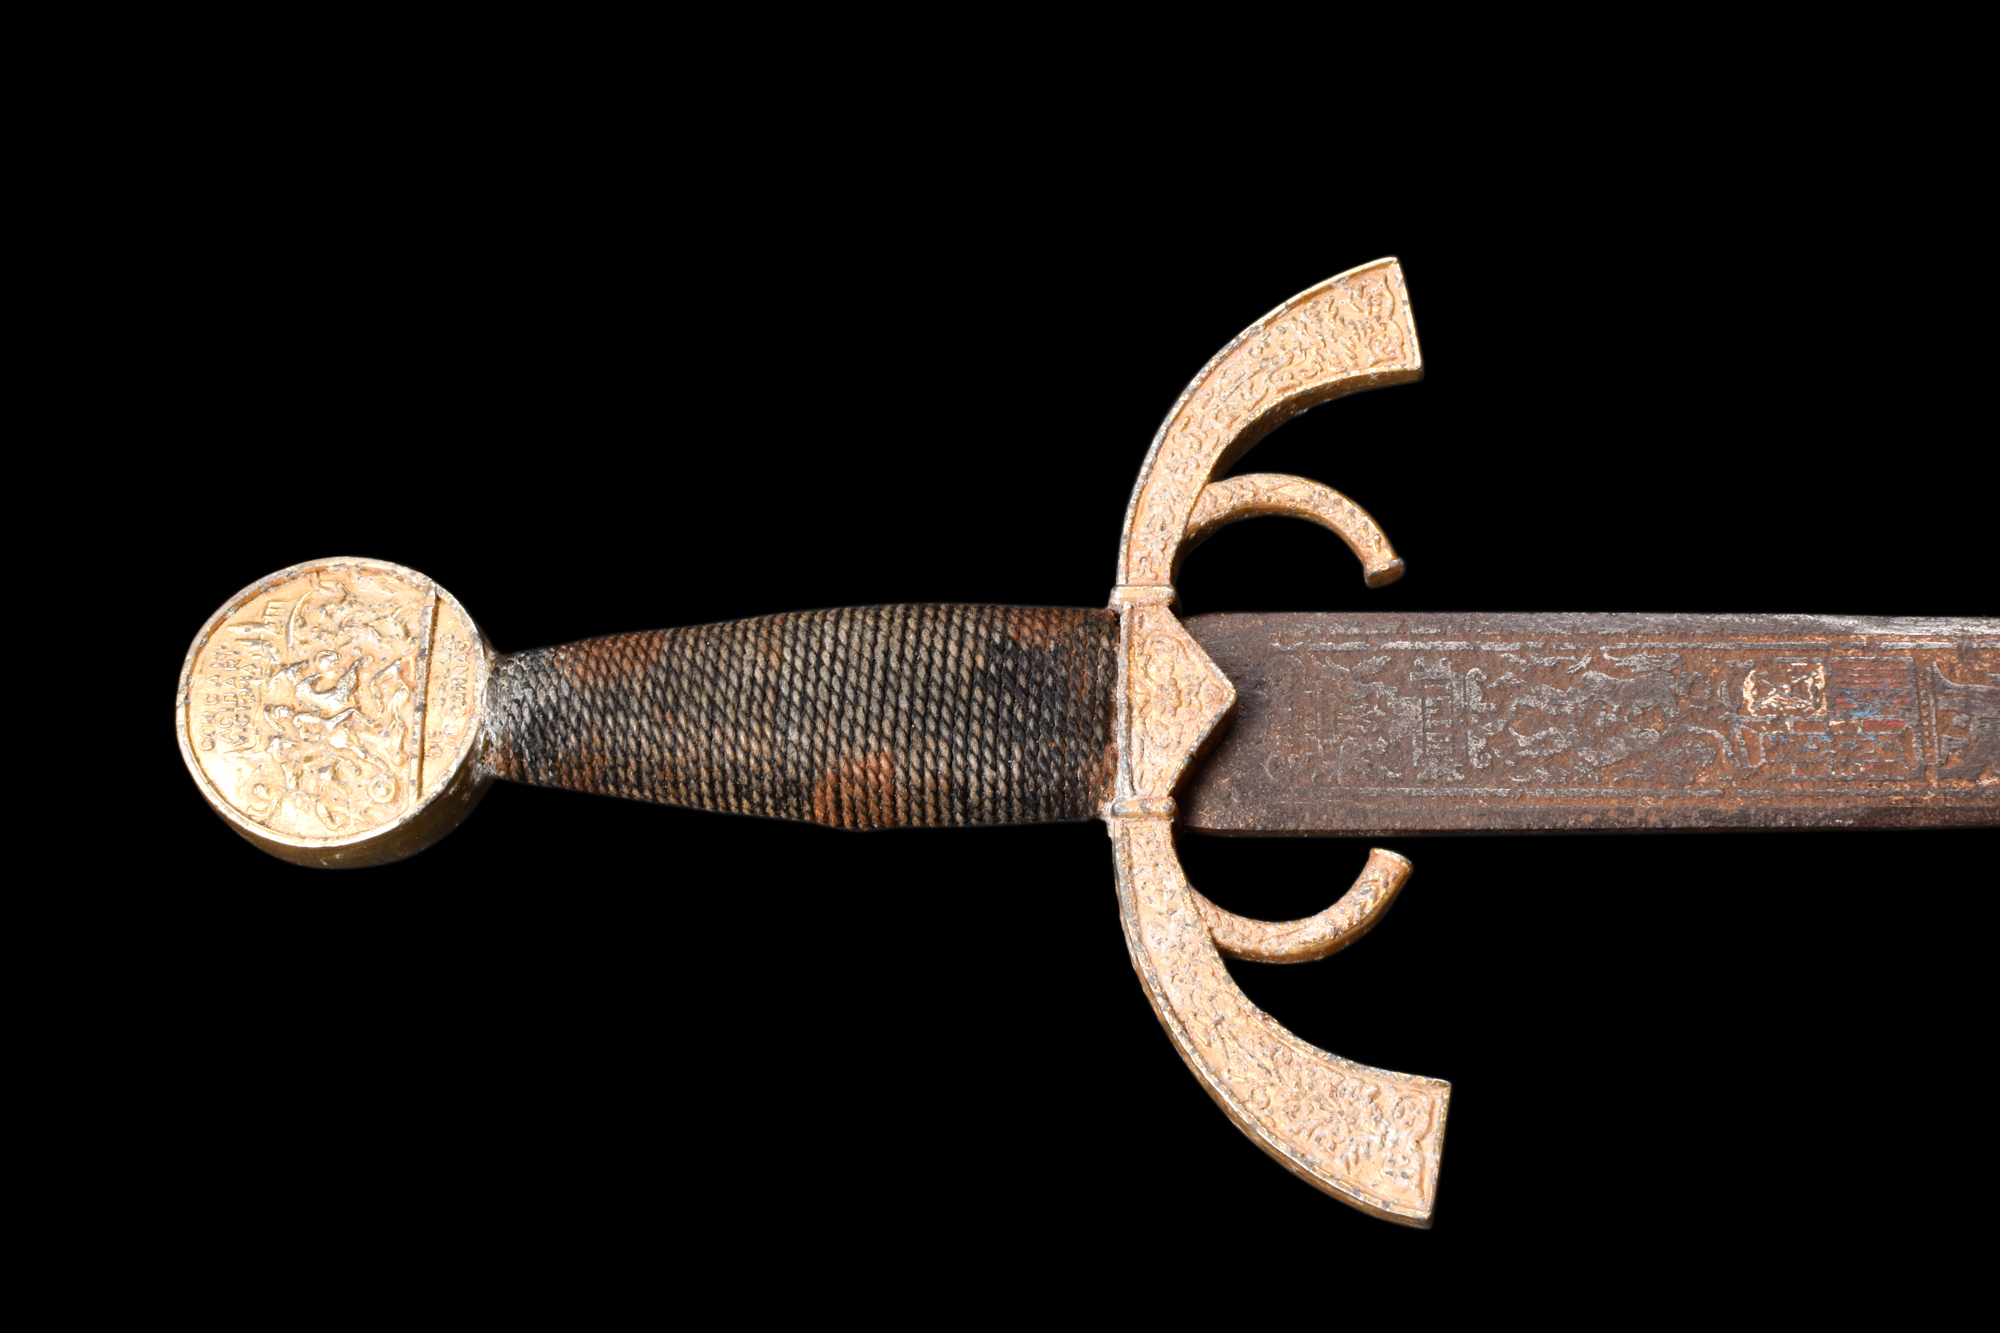 A SWORD IN 15TH CENTURY STYLE - Image 6 of 9